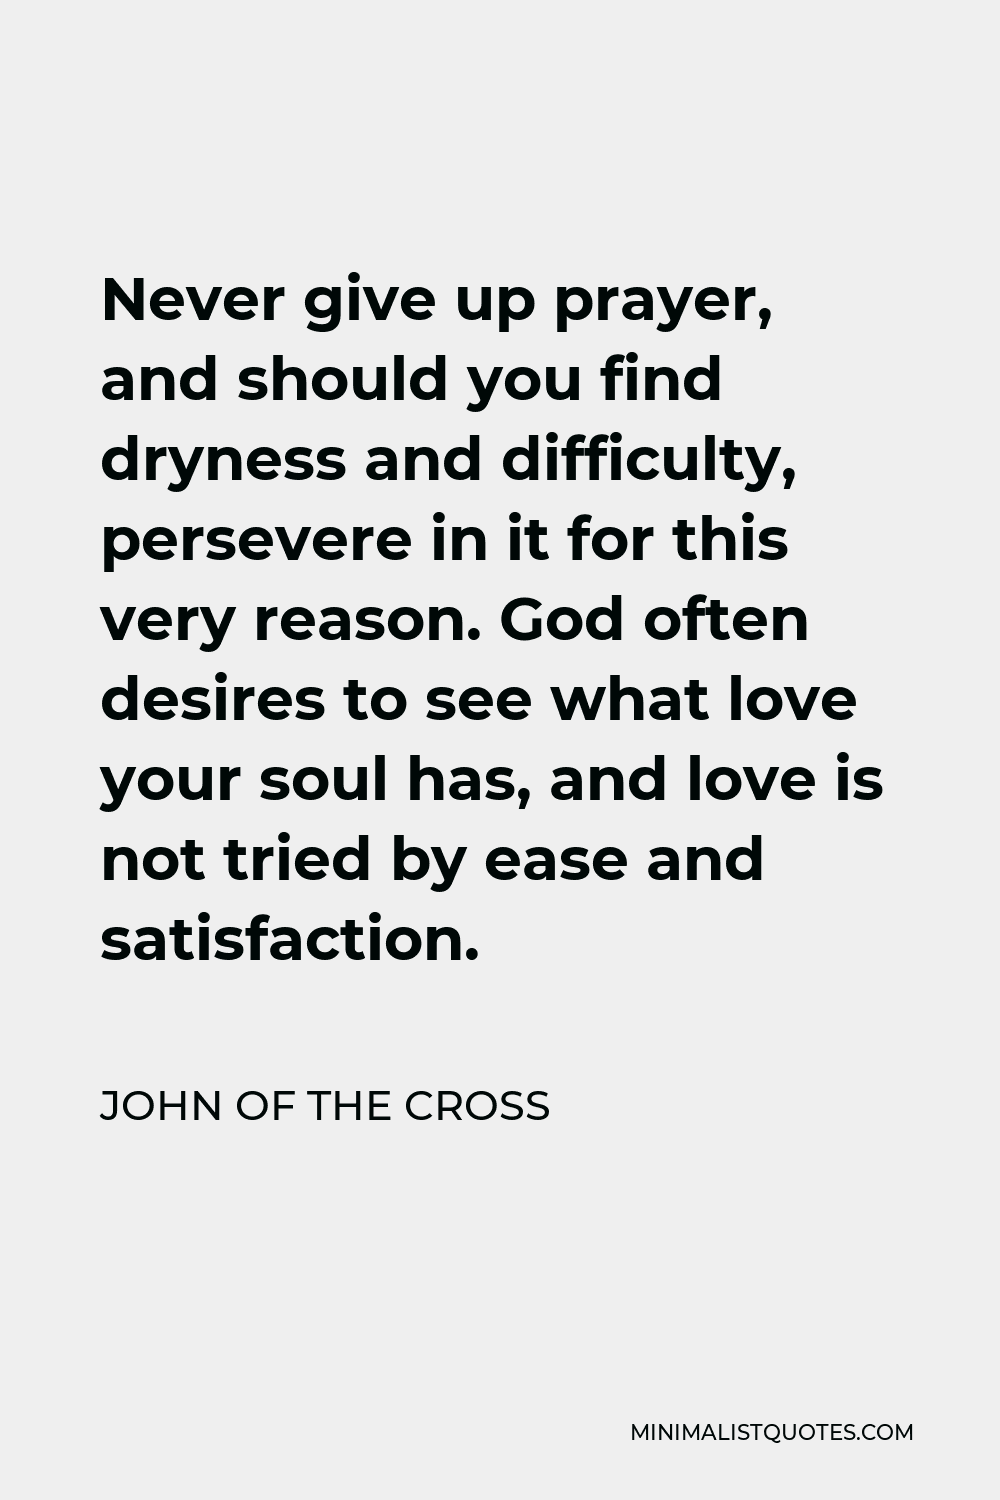 John of the Cross Quote - Never give up prayer, and should you find dryness and difficulty, persevere in it for this very reason. God often desires to see what love your soul has, and love is not tried by ease and satisfaction.